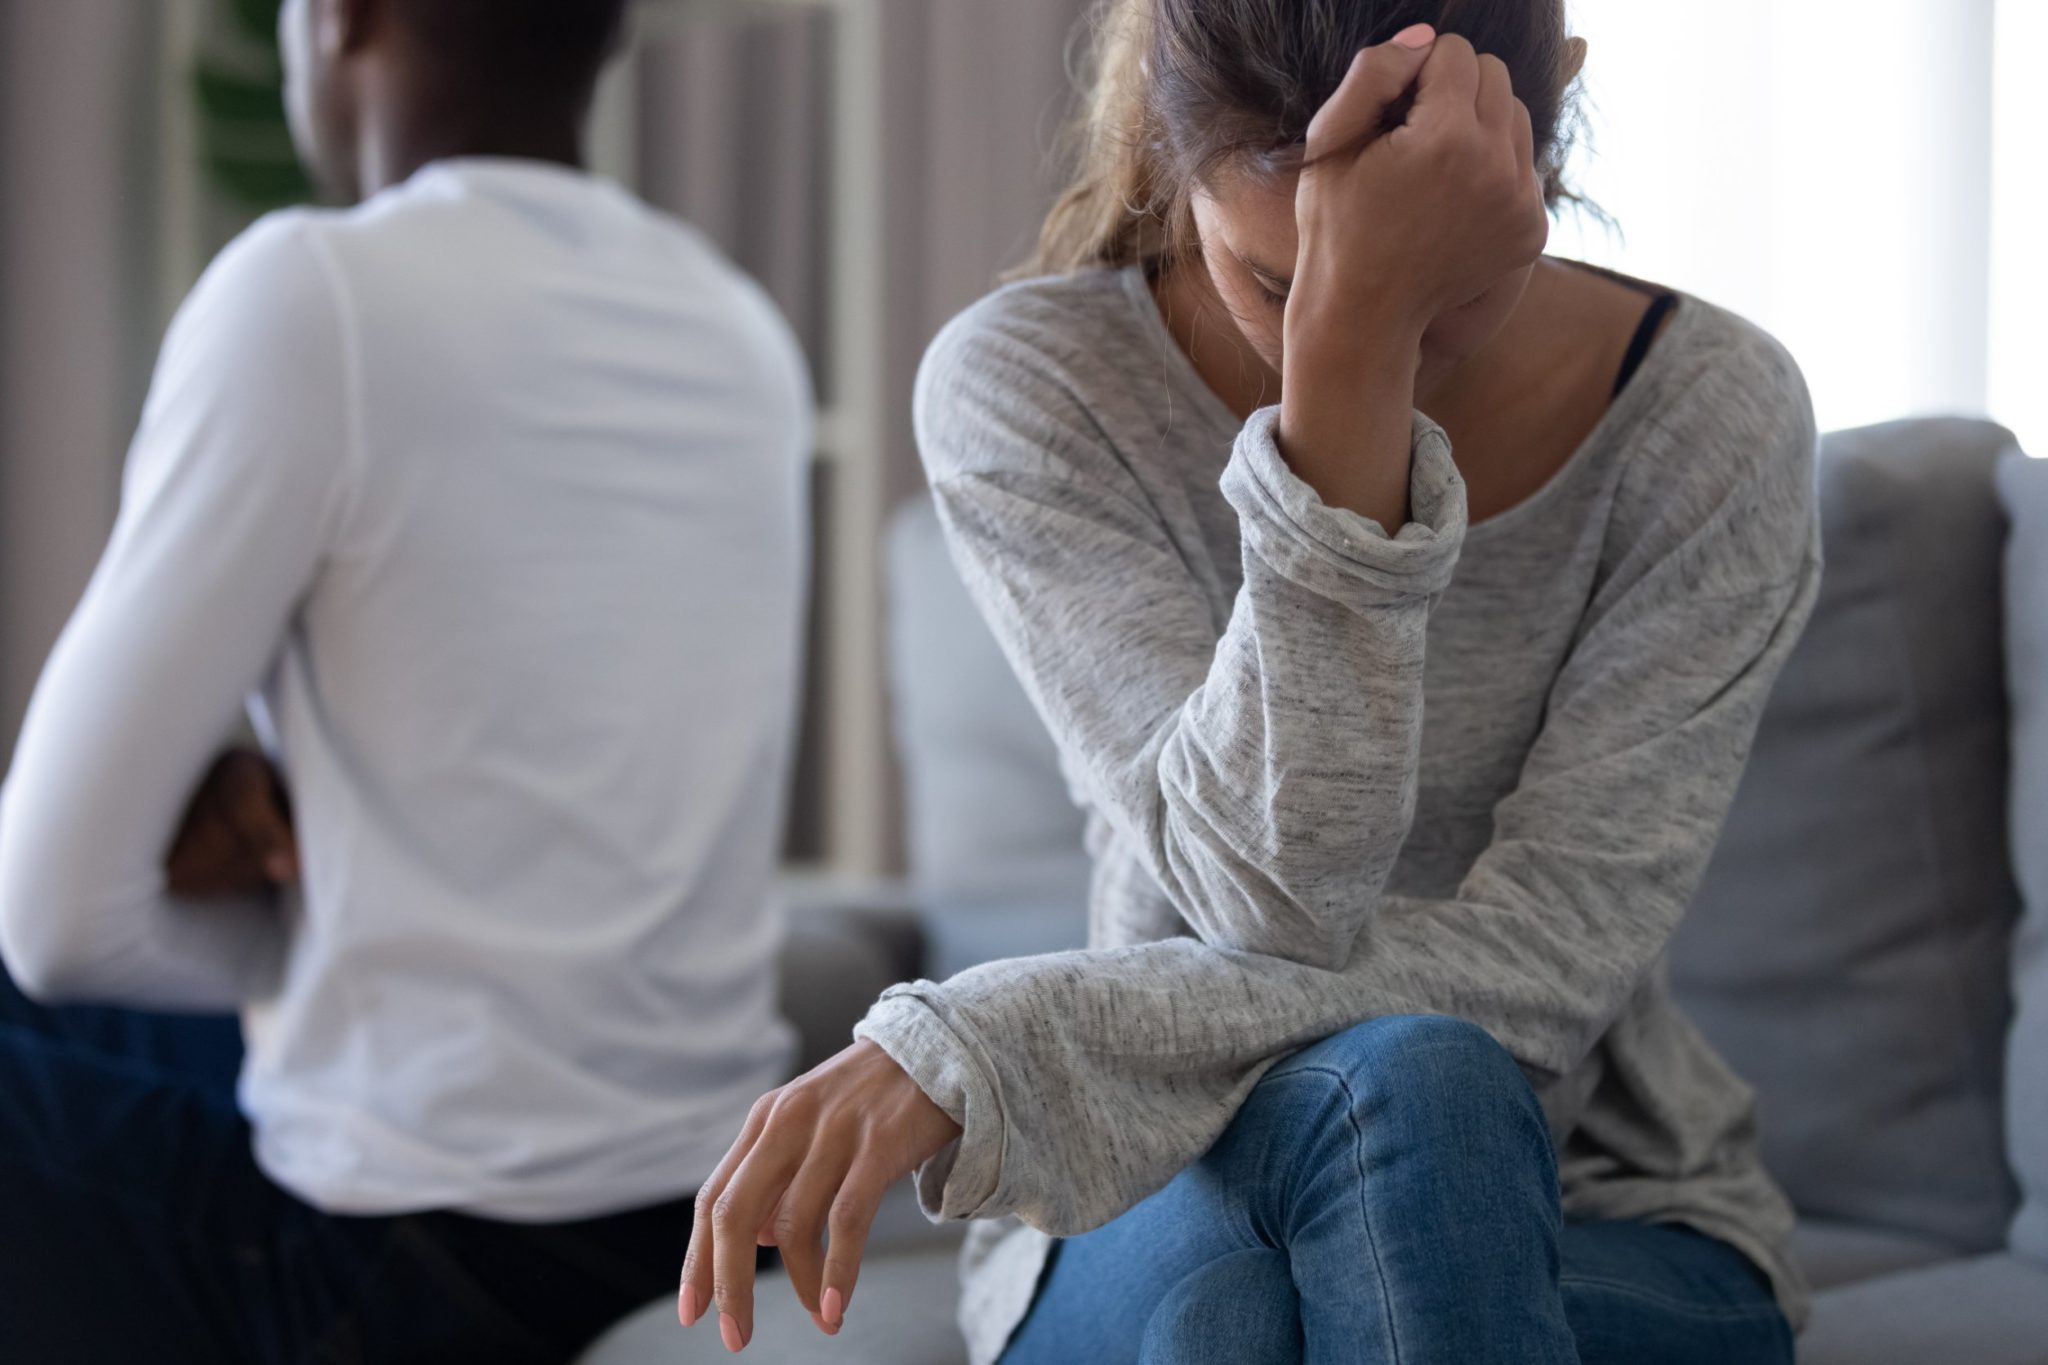 , The Line Between IL Domestic Violence and Self Defense